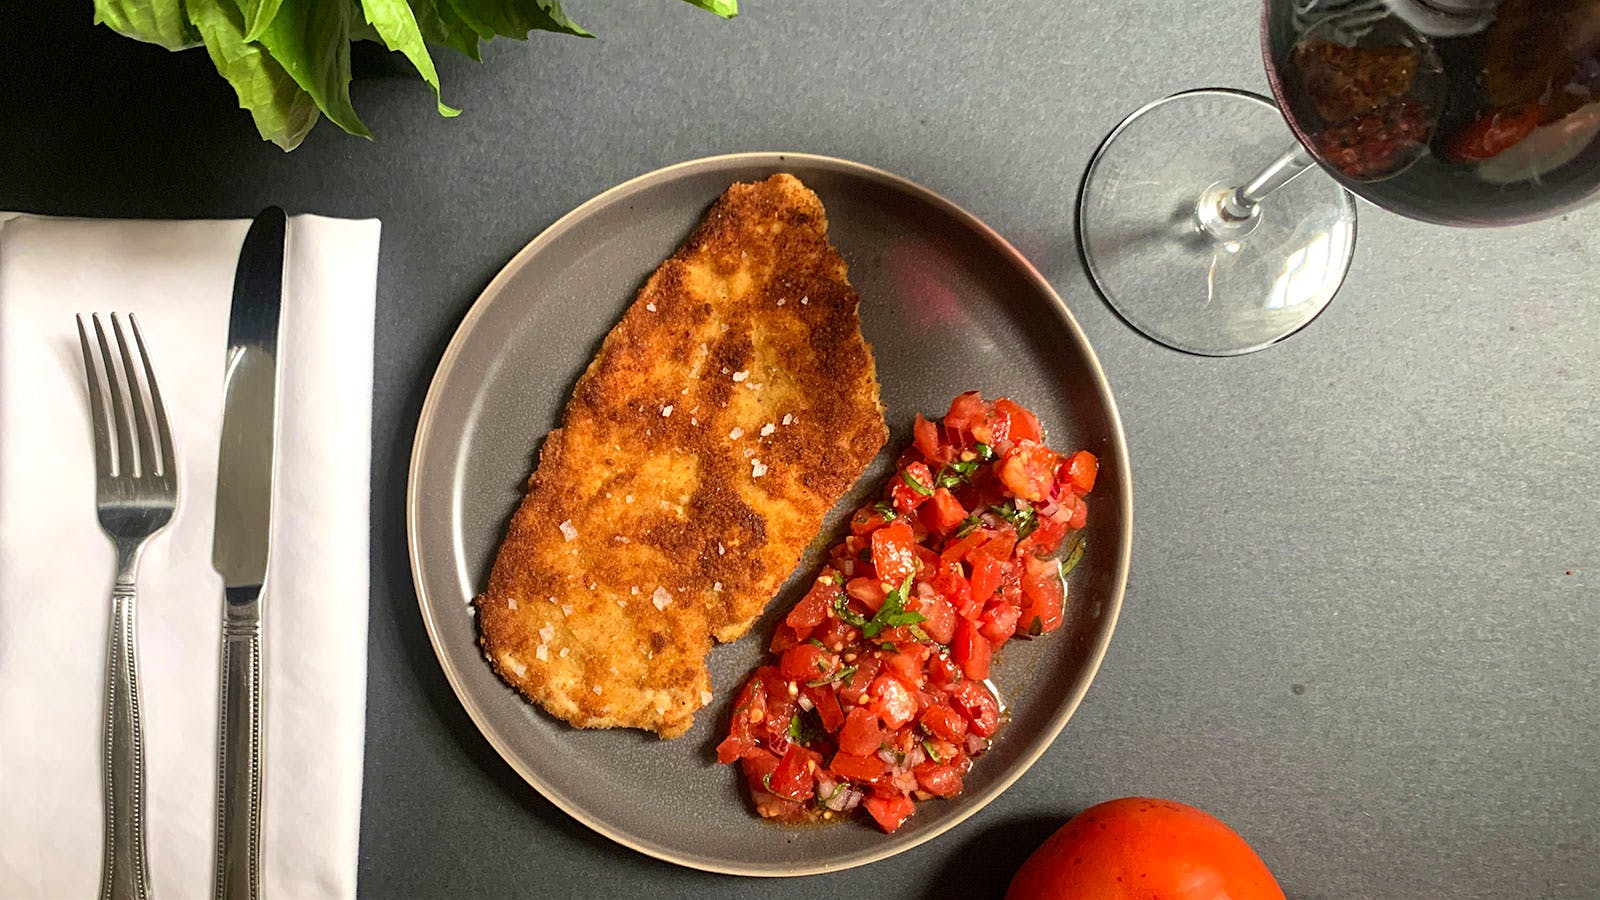 8 & $20: Crispy Chicken with Tomato Topping